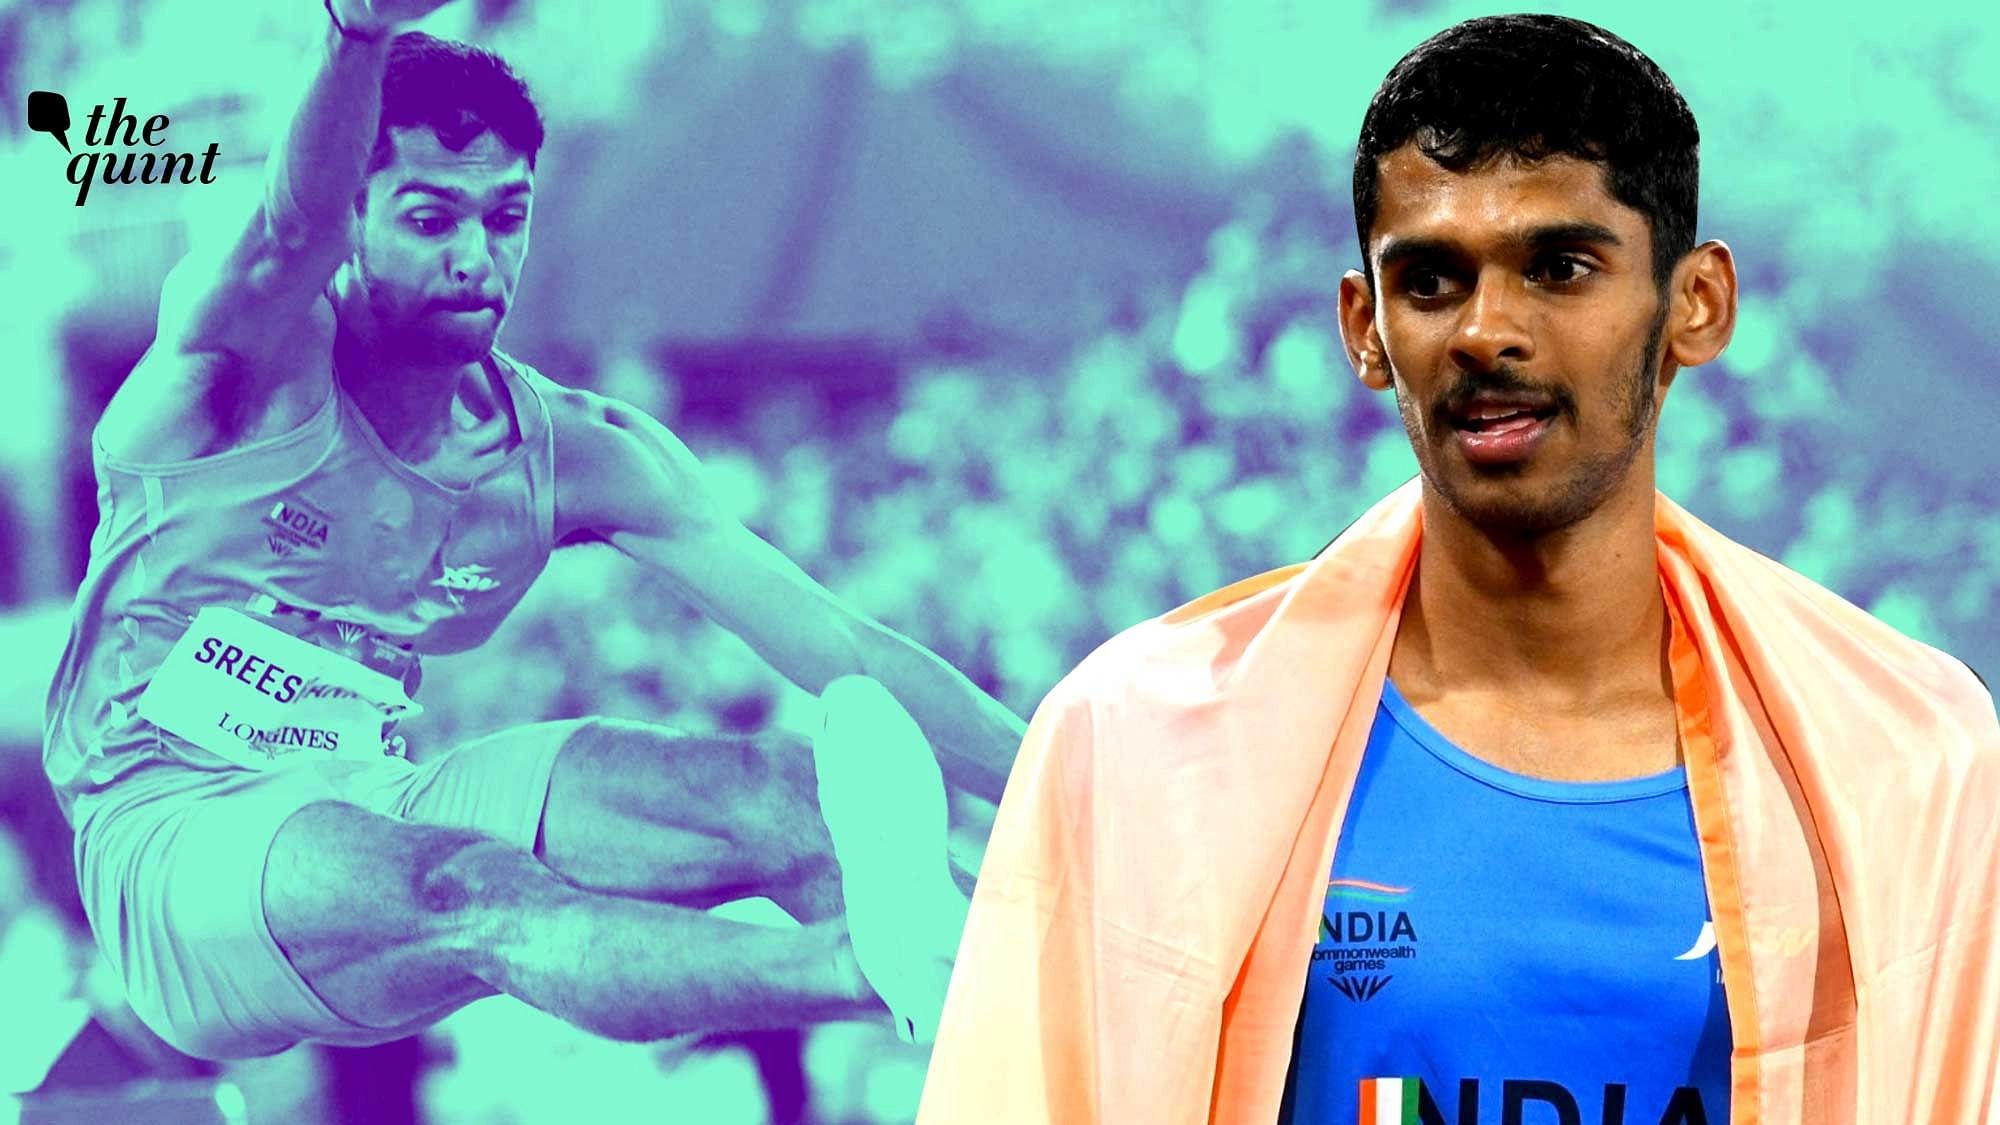 <div class="paragraphs"><p>Murali Sreeshankar finally proved his potential on an international level by winning a silver medal in the men's long jump at the 2022 Commonwealth Games in Birmingham.&nbsp;</p></div>